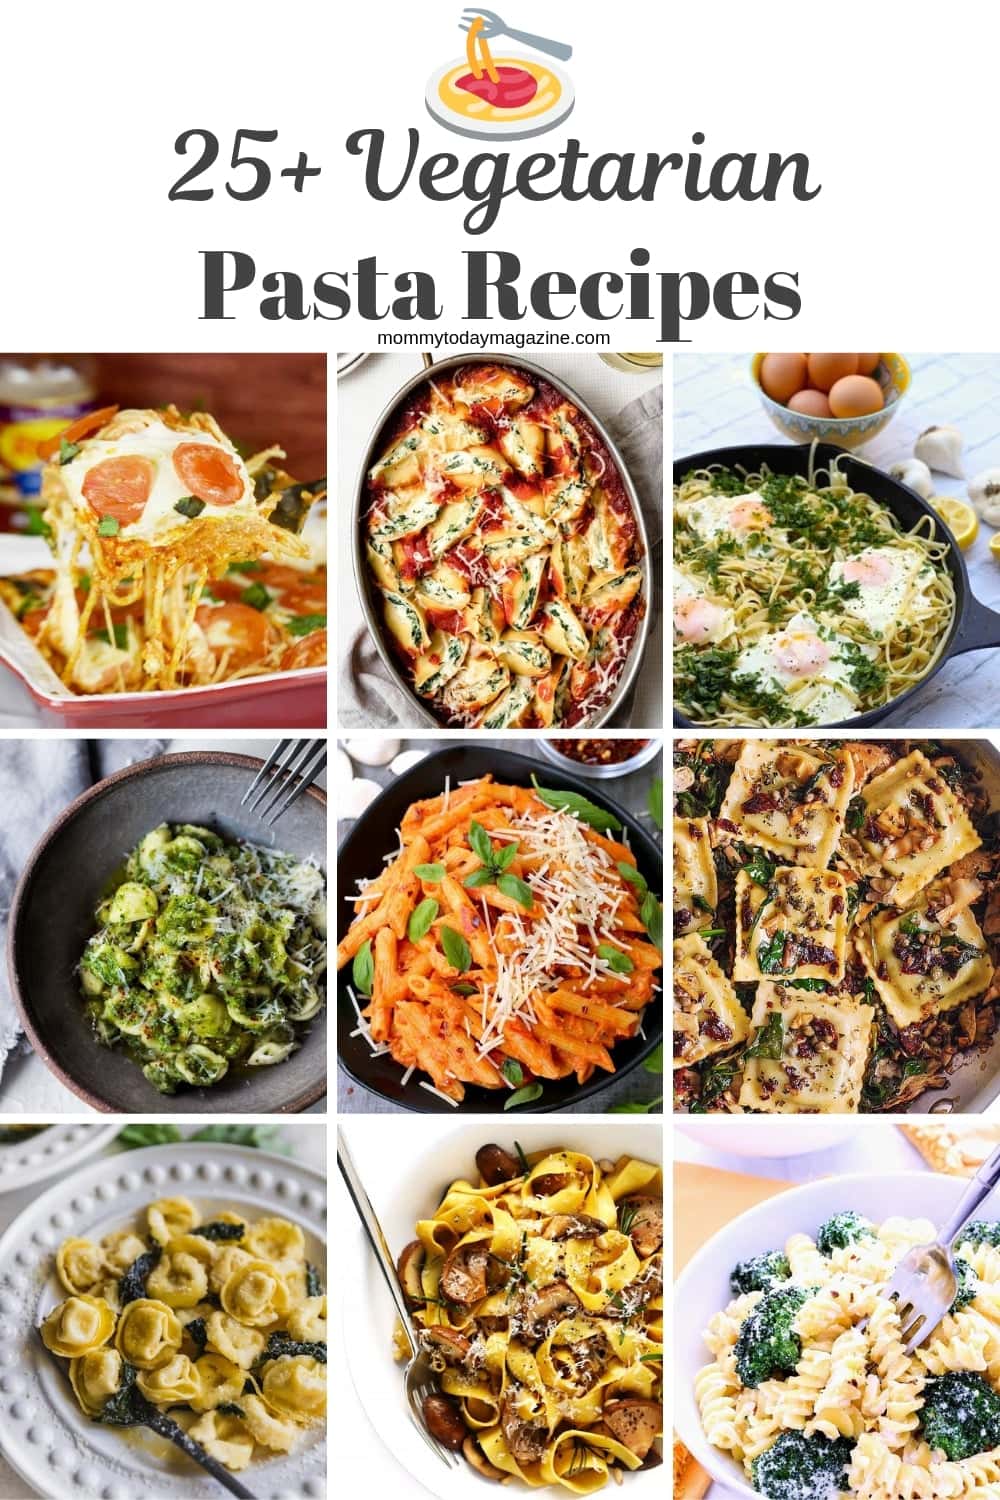 Vegetarian Pasta Recipes - Easy Meat-free Pasta Dishes